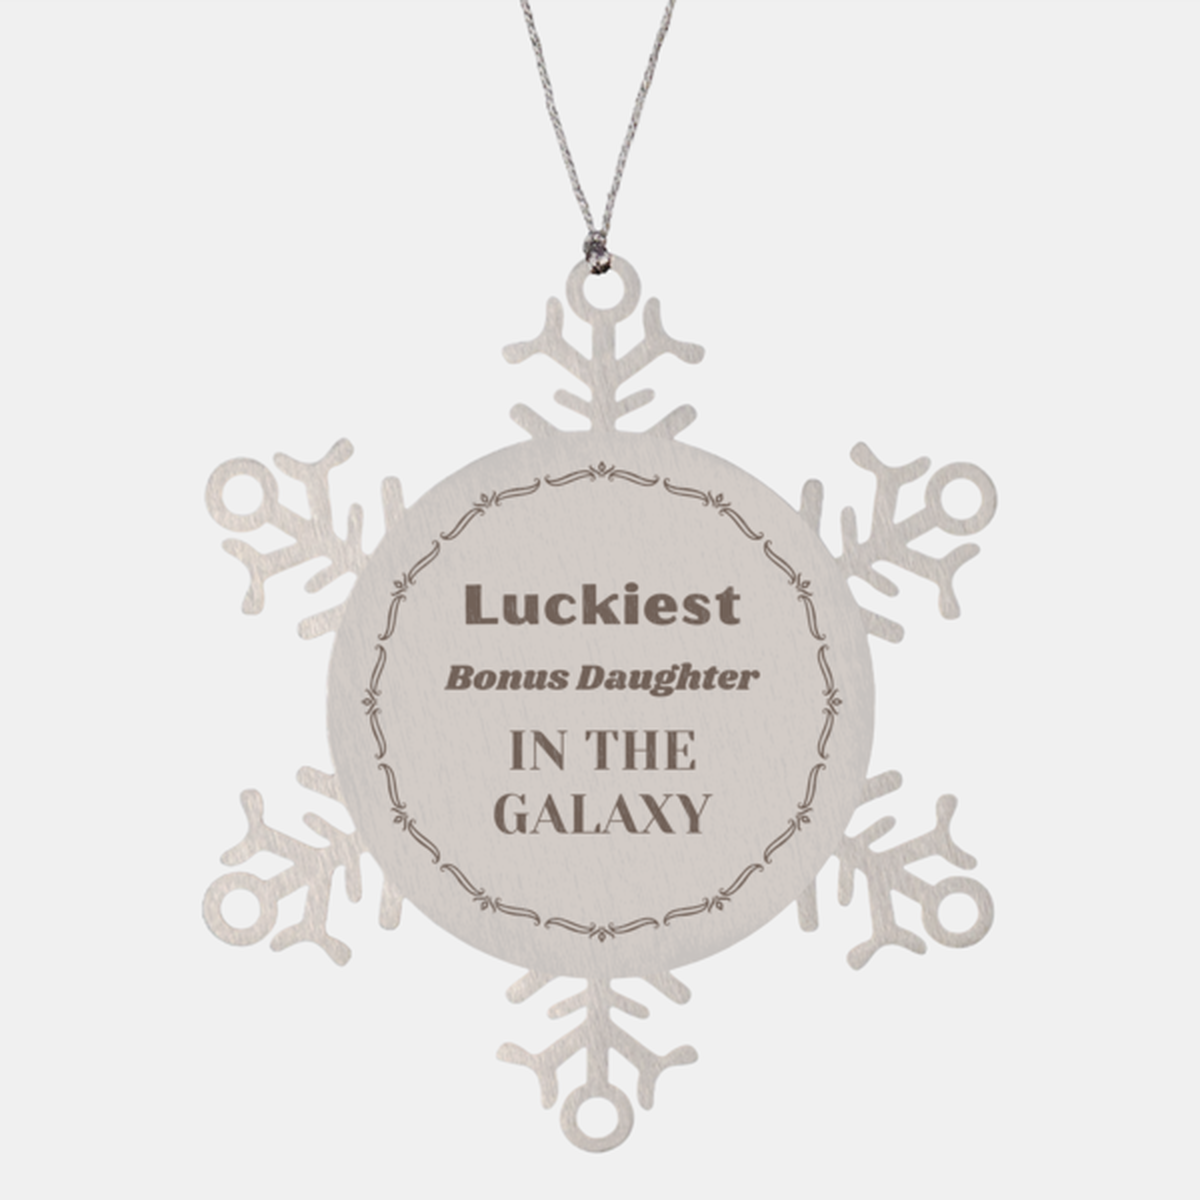 Luckiest Bonus Daughter in the Galaxy, To My Bonus Daughter Ornament Gifts, Christmas Bonus Daughter Snowflake Ornament Gifts, X-mas Decorations Unique Gifts For Bonus Daughter Men Women